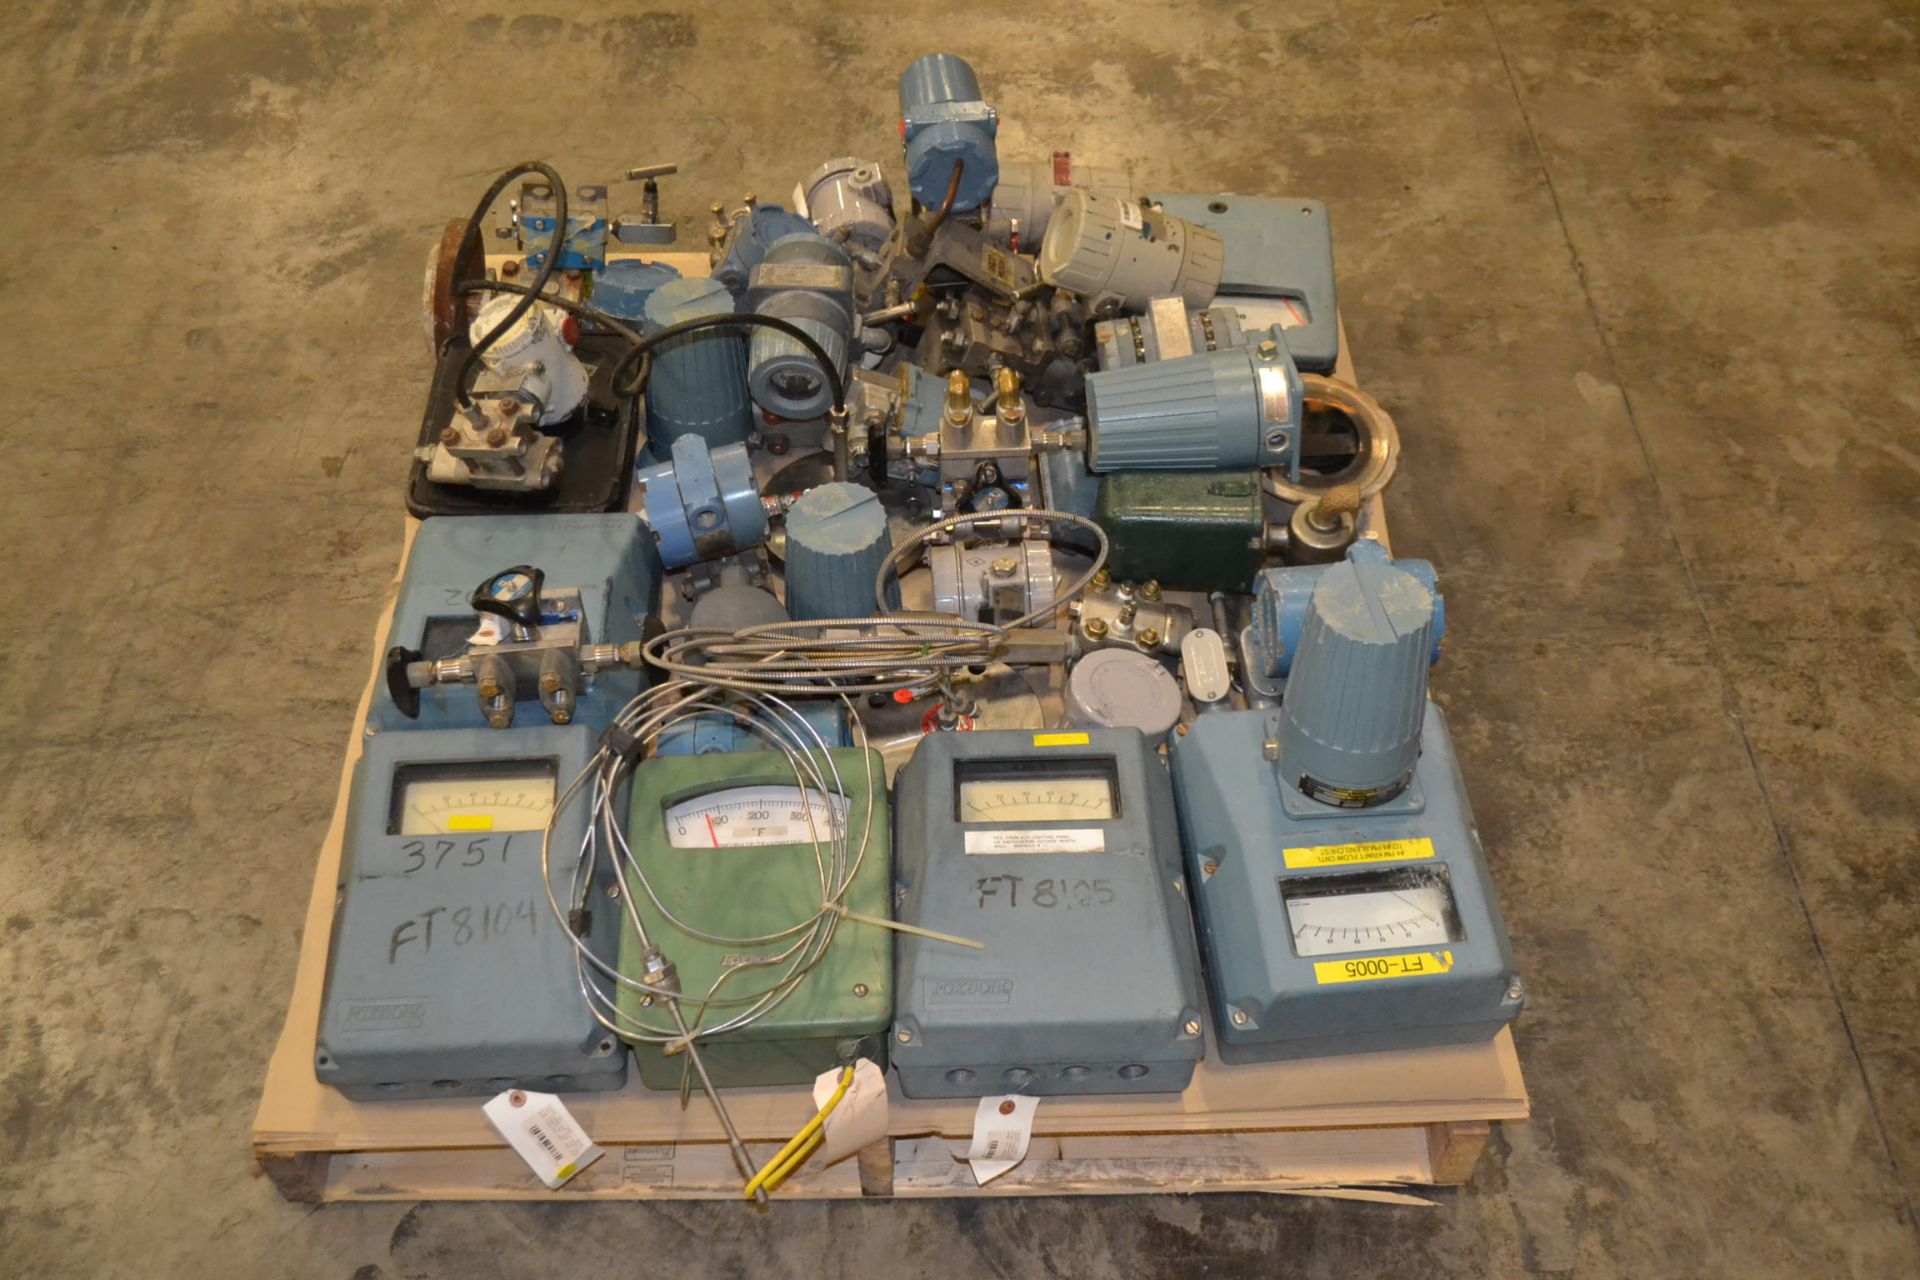 LOT OF ASSORTED INSTRUMENTATION - PRESSURE TRANSMITTERS, FLOW TRANSMITTERS, PNEUMATIC CONTROLLERS